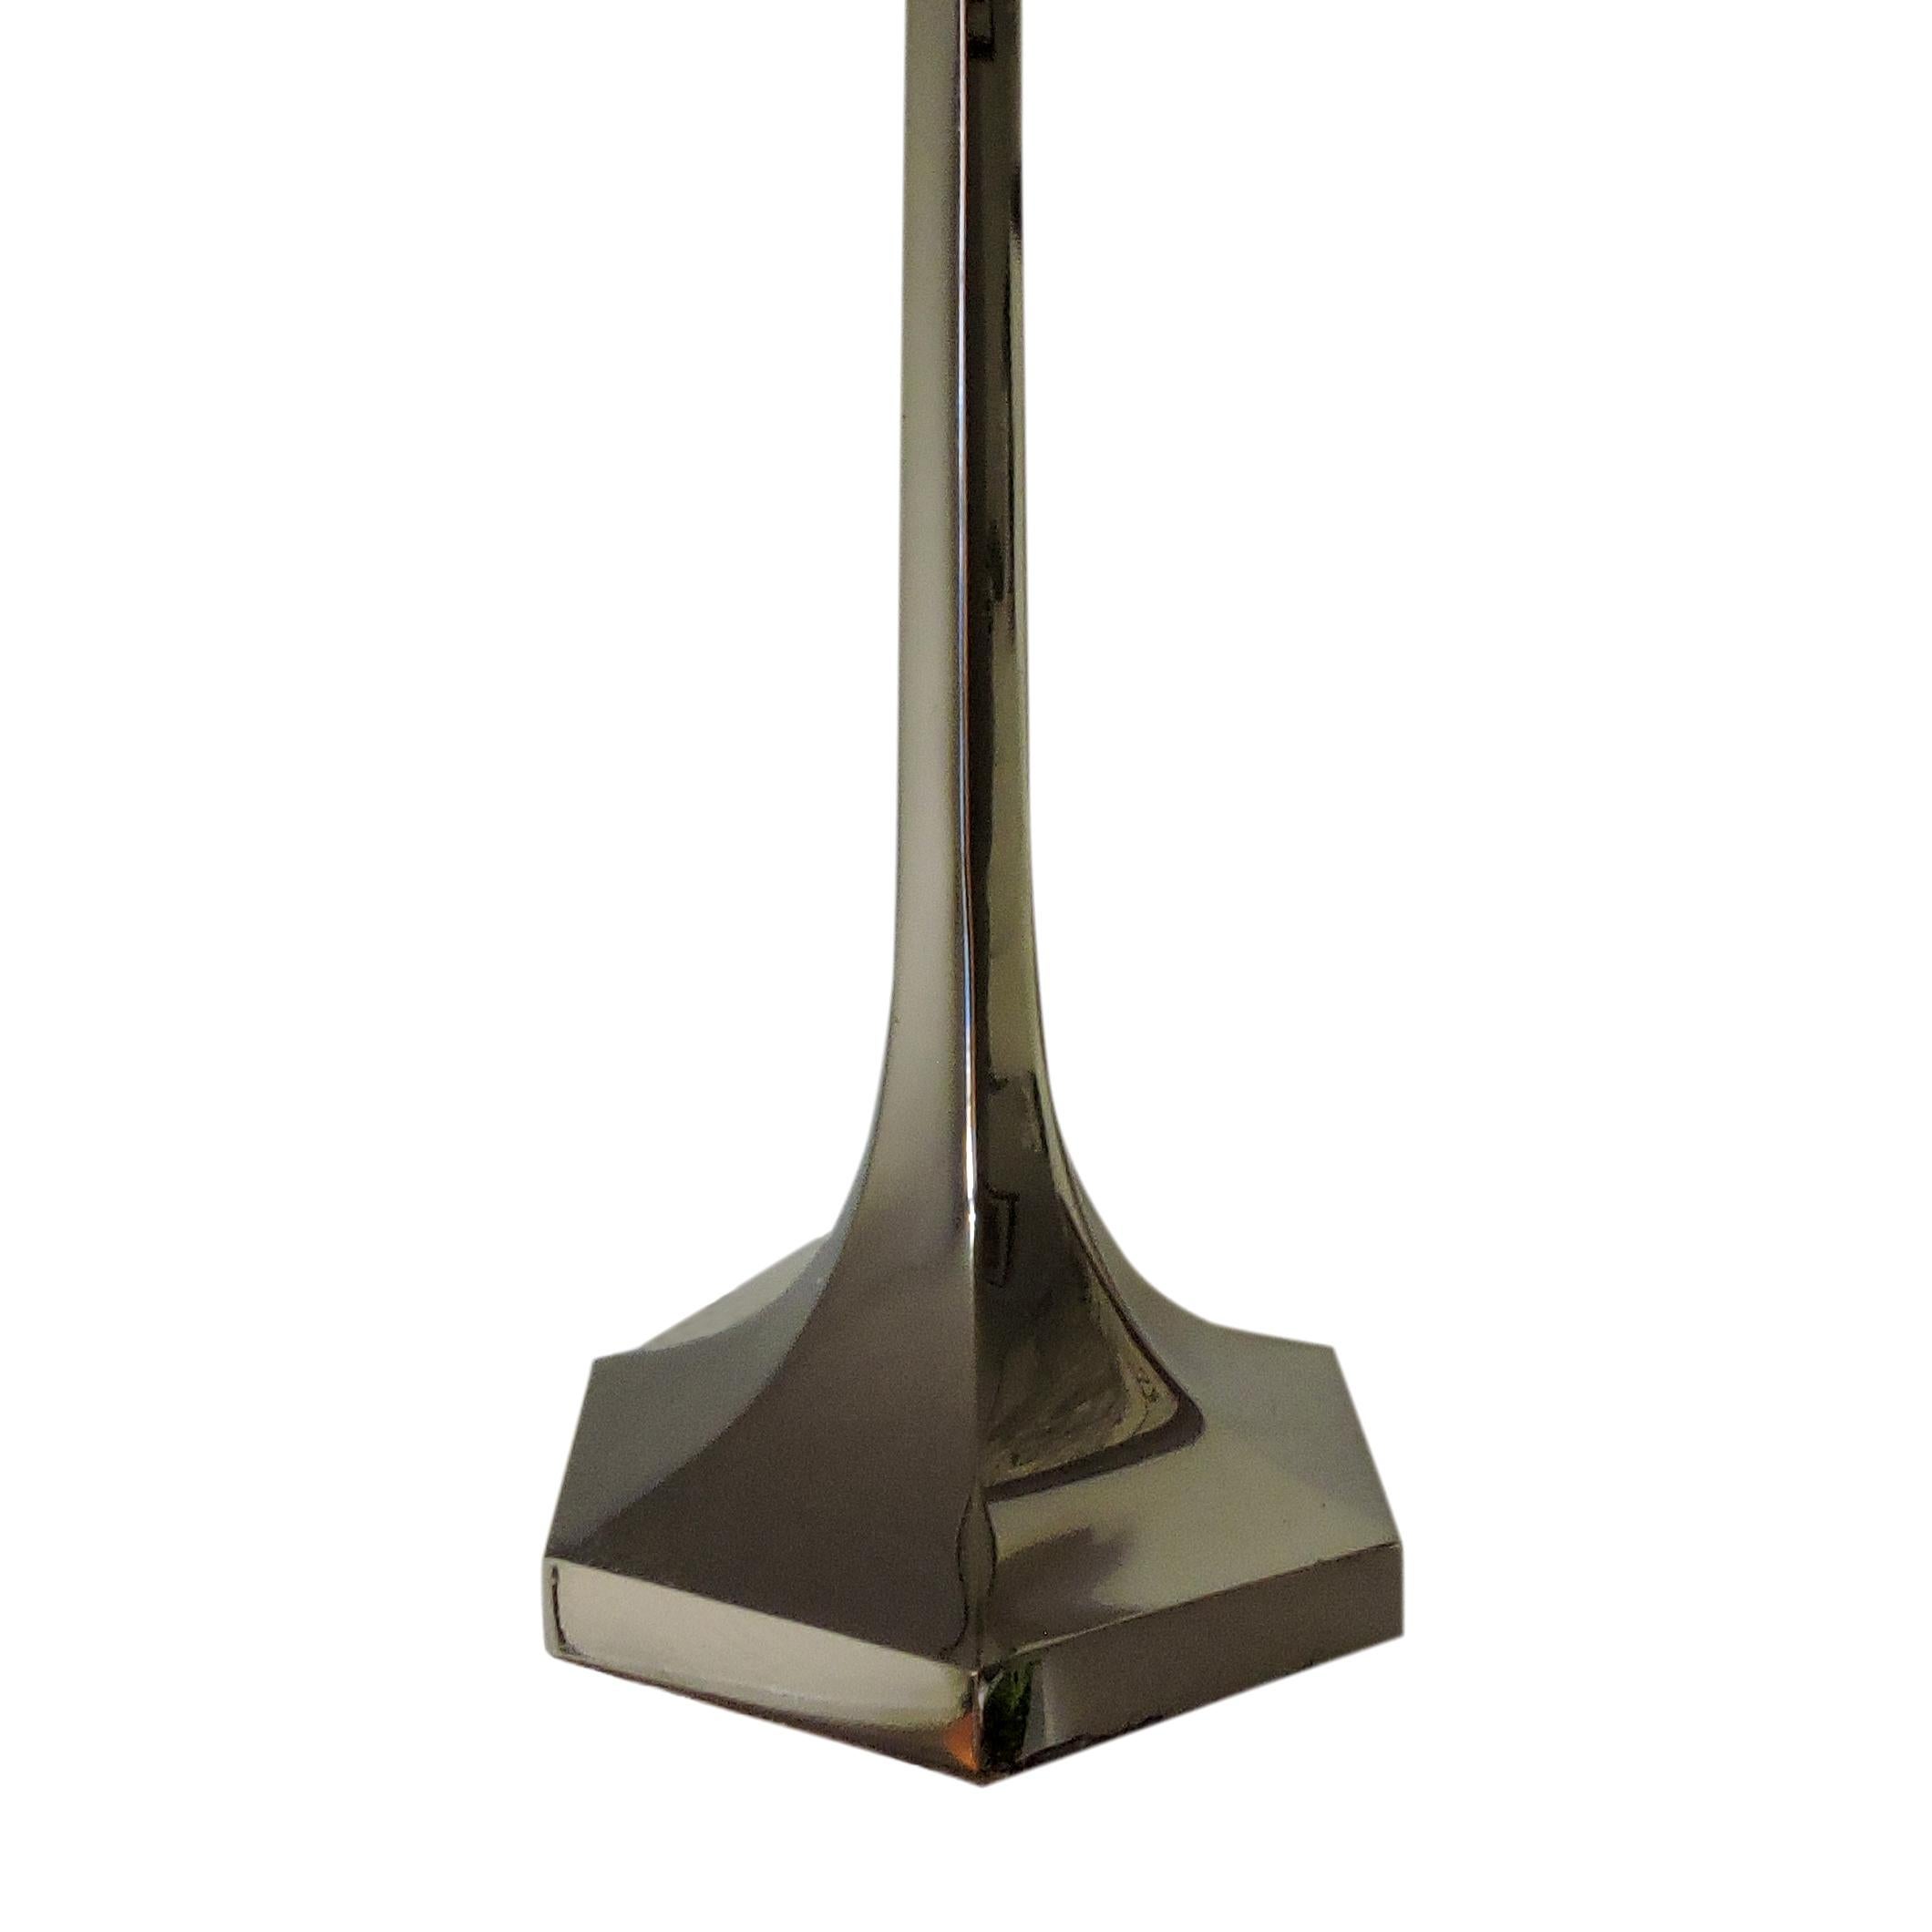 Art Deco Stainless Steel Table Lamp from Lustrerie Deknudt, 1920s In Good Condition For Sale In Chesham, GB